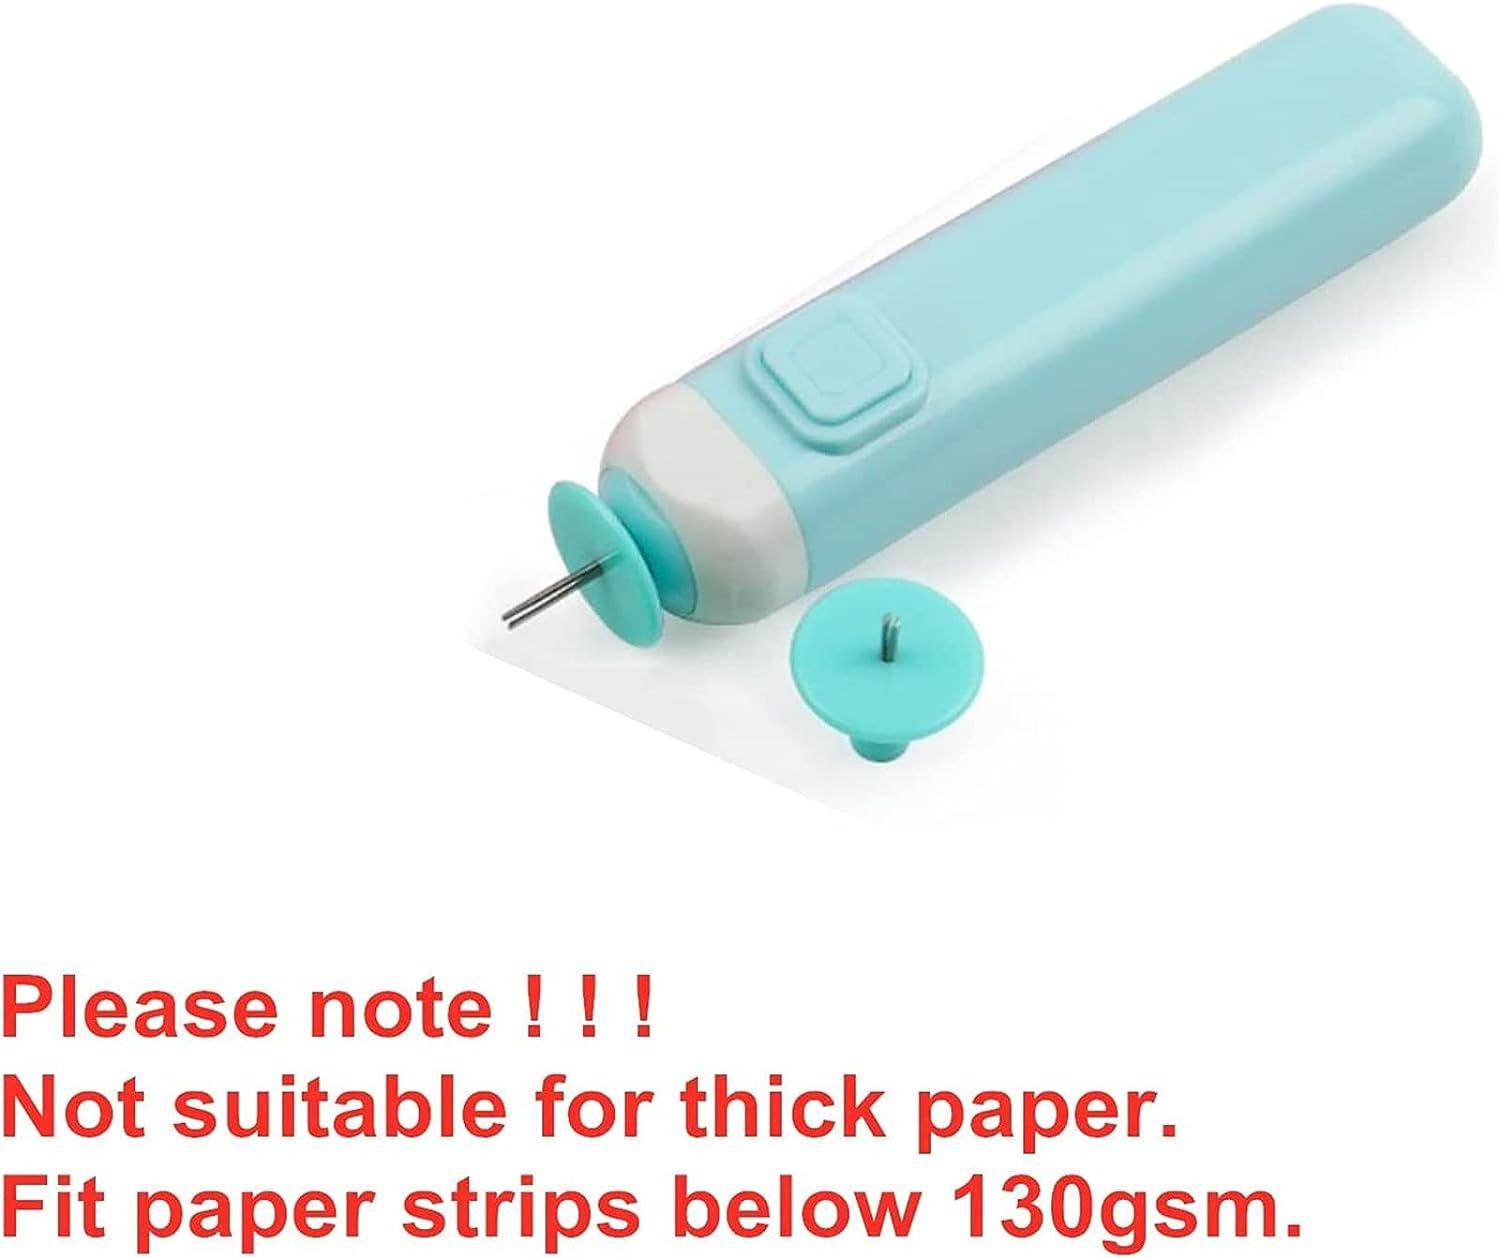 Electric Quilling Pen, Electric Quilling Slotted Tool Automated Paper  Volume Curling Pen()